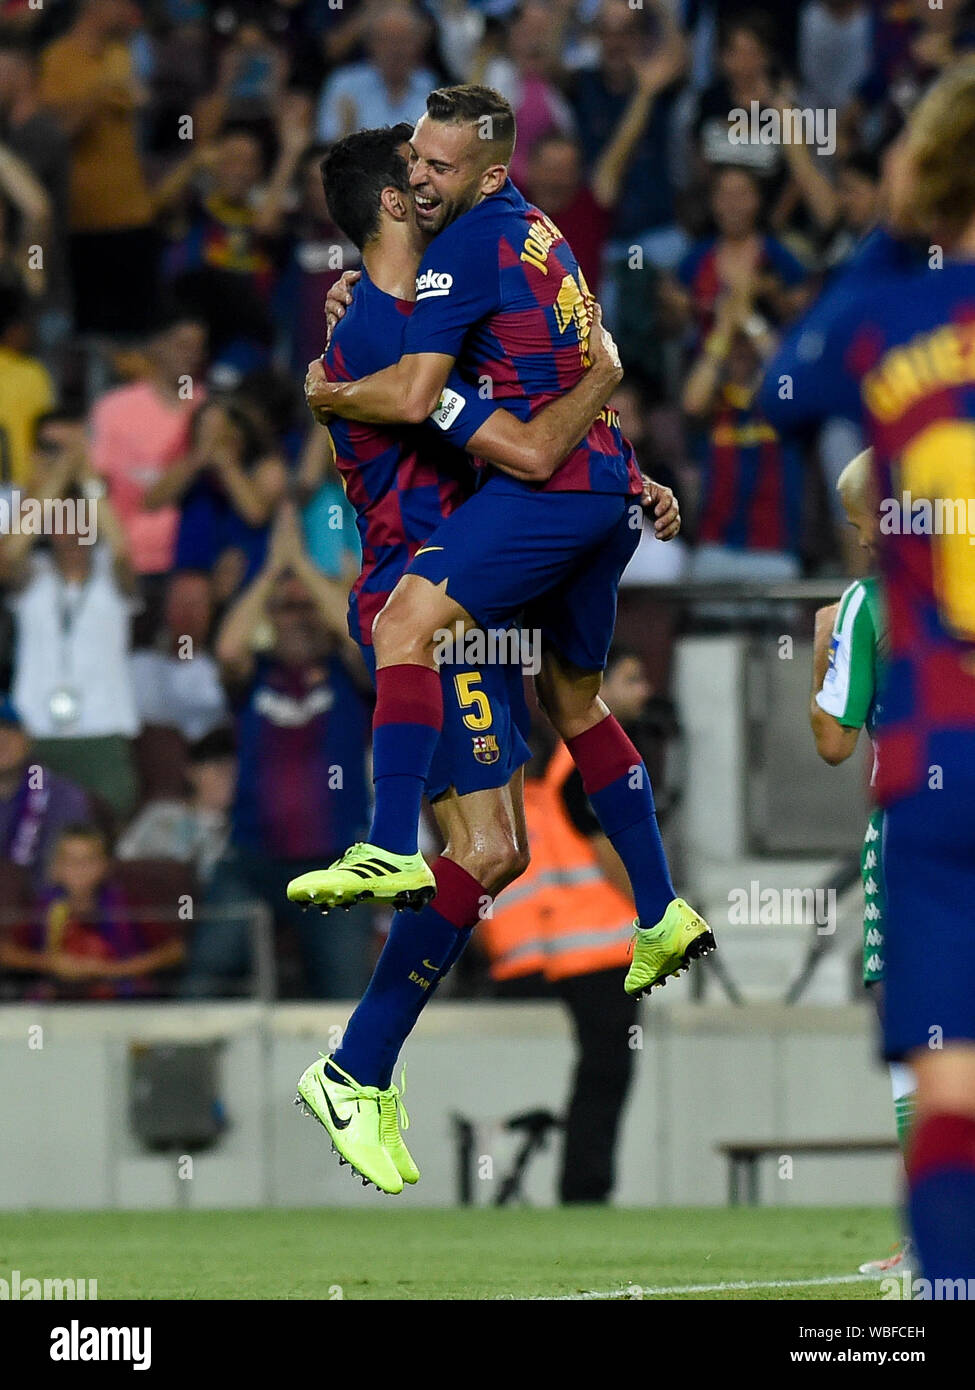 Barcelona, Spain. 26th Aug, 2019. BARCELONA, SPAIN - AUGUST 25: Sergio Busquets and Jordi Alba of FC Barcelona celebrate after score his team fourth goal during the La Liga match between FC Barcelona and Real Betis at Camp Nou on August 25 2019 in Barcelona, Spain. (Photo by David Ramirez/Pacific Press) Credit: Pacific Press Agency/Alamy Live News Stock Photo